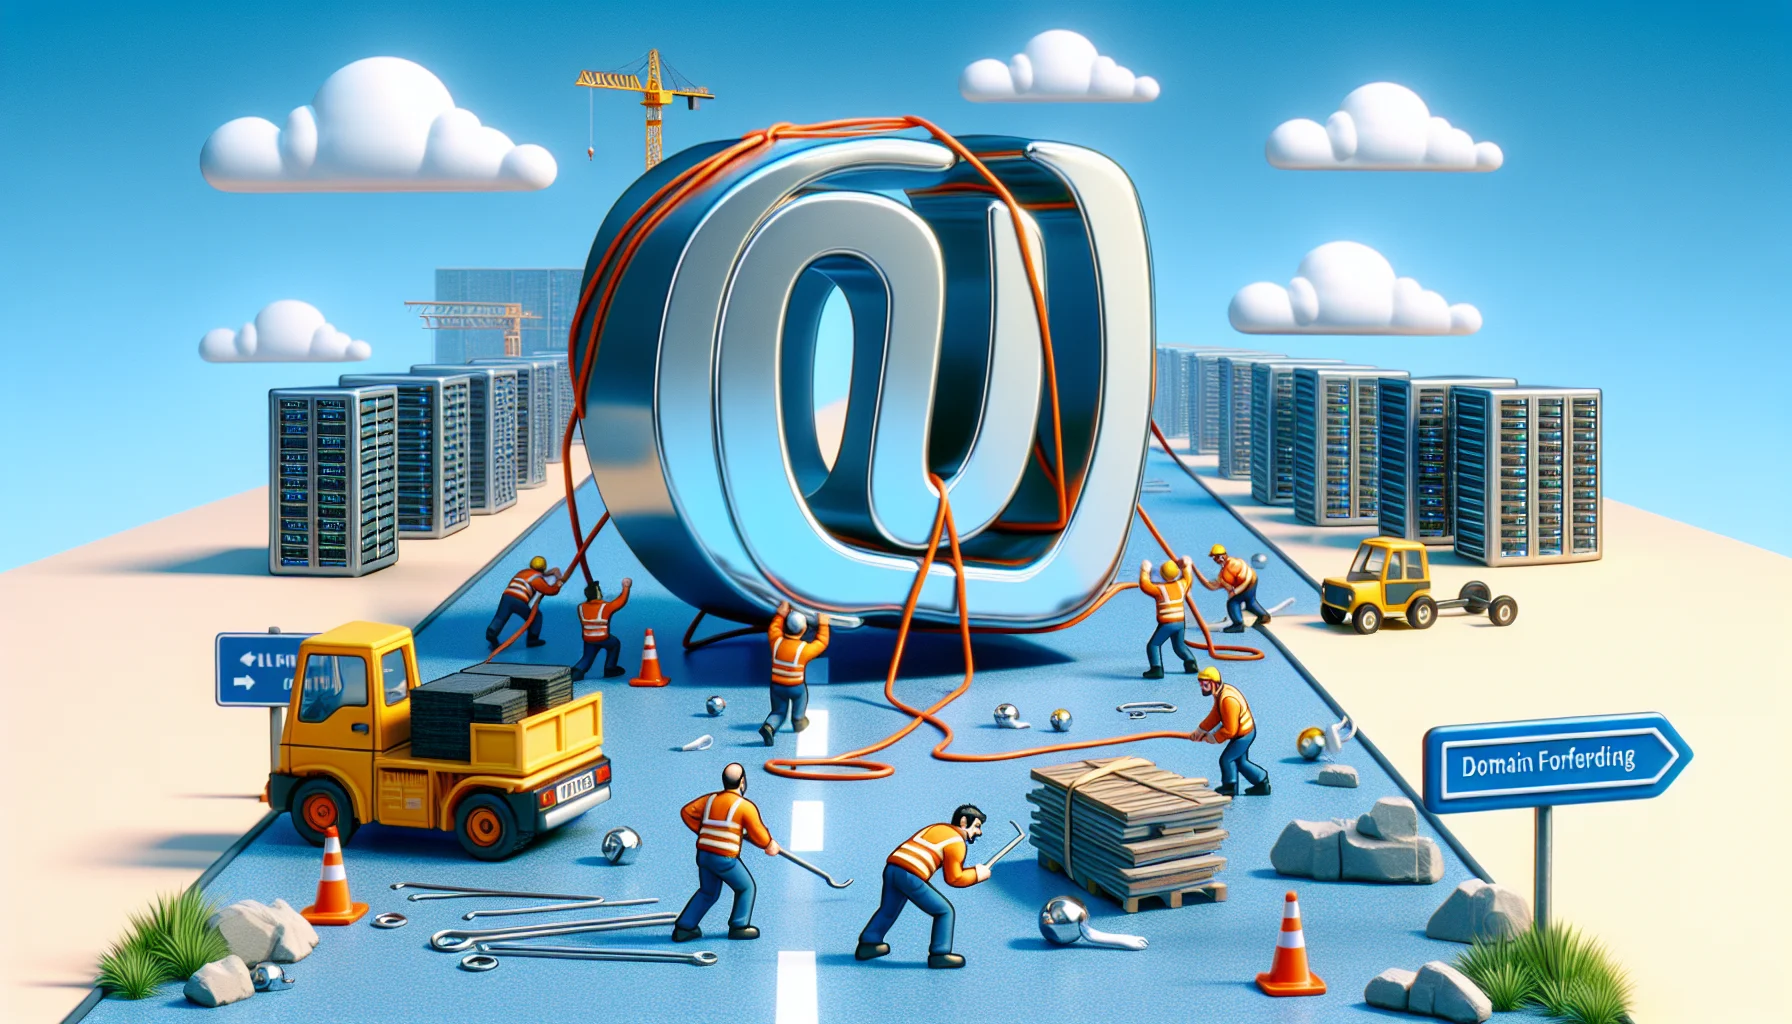 Imagine a humorous scene related to the realm of web hosting to depict a scenario where domain forwarding isn't working as planned. The scene might consist of a virtual construction team on a digital road. In the foreground, there's a symbol, the Internet URL, which they were supposed to forward. It's physically represented as a large, tangible chunk of metal. The workers could be cartoonish characters, visibly baffled as they try to heave and push the enormous URL, come up with ways to move it. Hints in the image could suggest that it's taking them longer than expected, illustrating the outage time in a comic manner. Add imagery that hints at web hosting environment, like cloud servers or data centers in the background, subtly implying towards the industry. Please remember this should not feature any specific brands or logo.